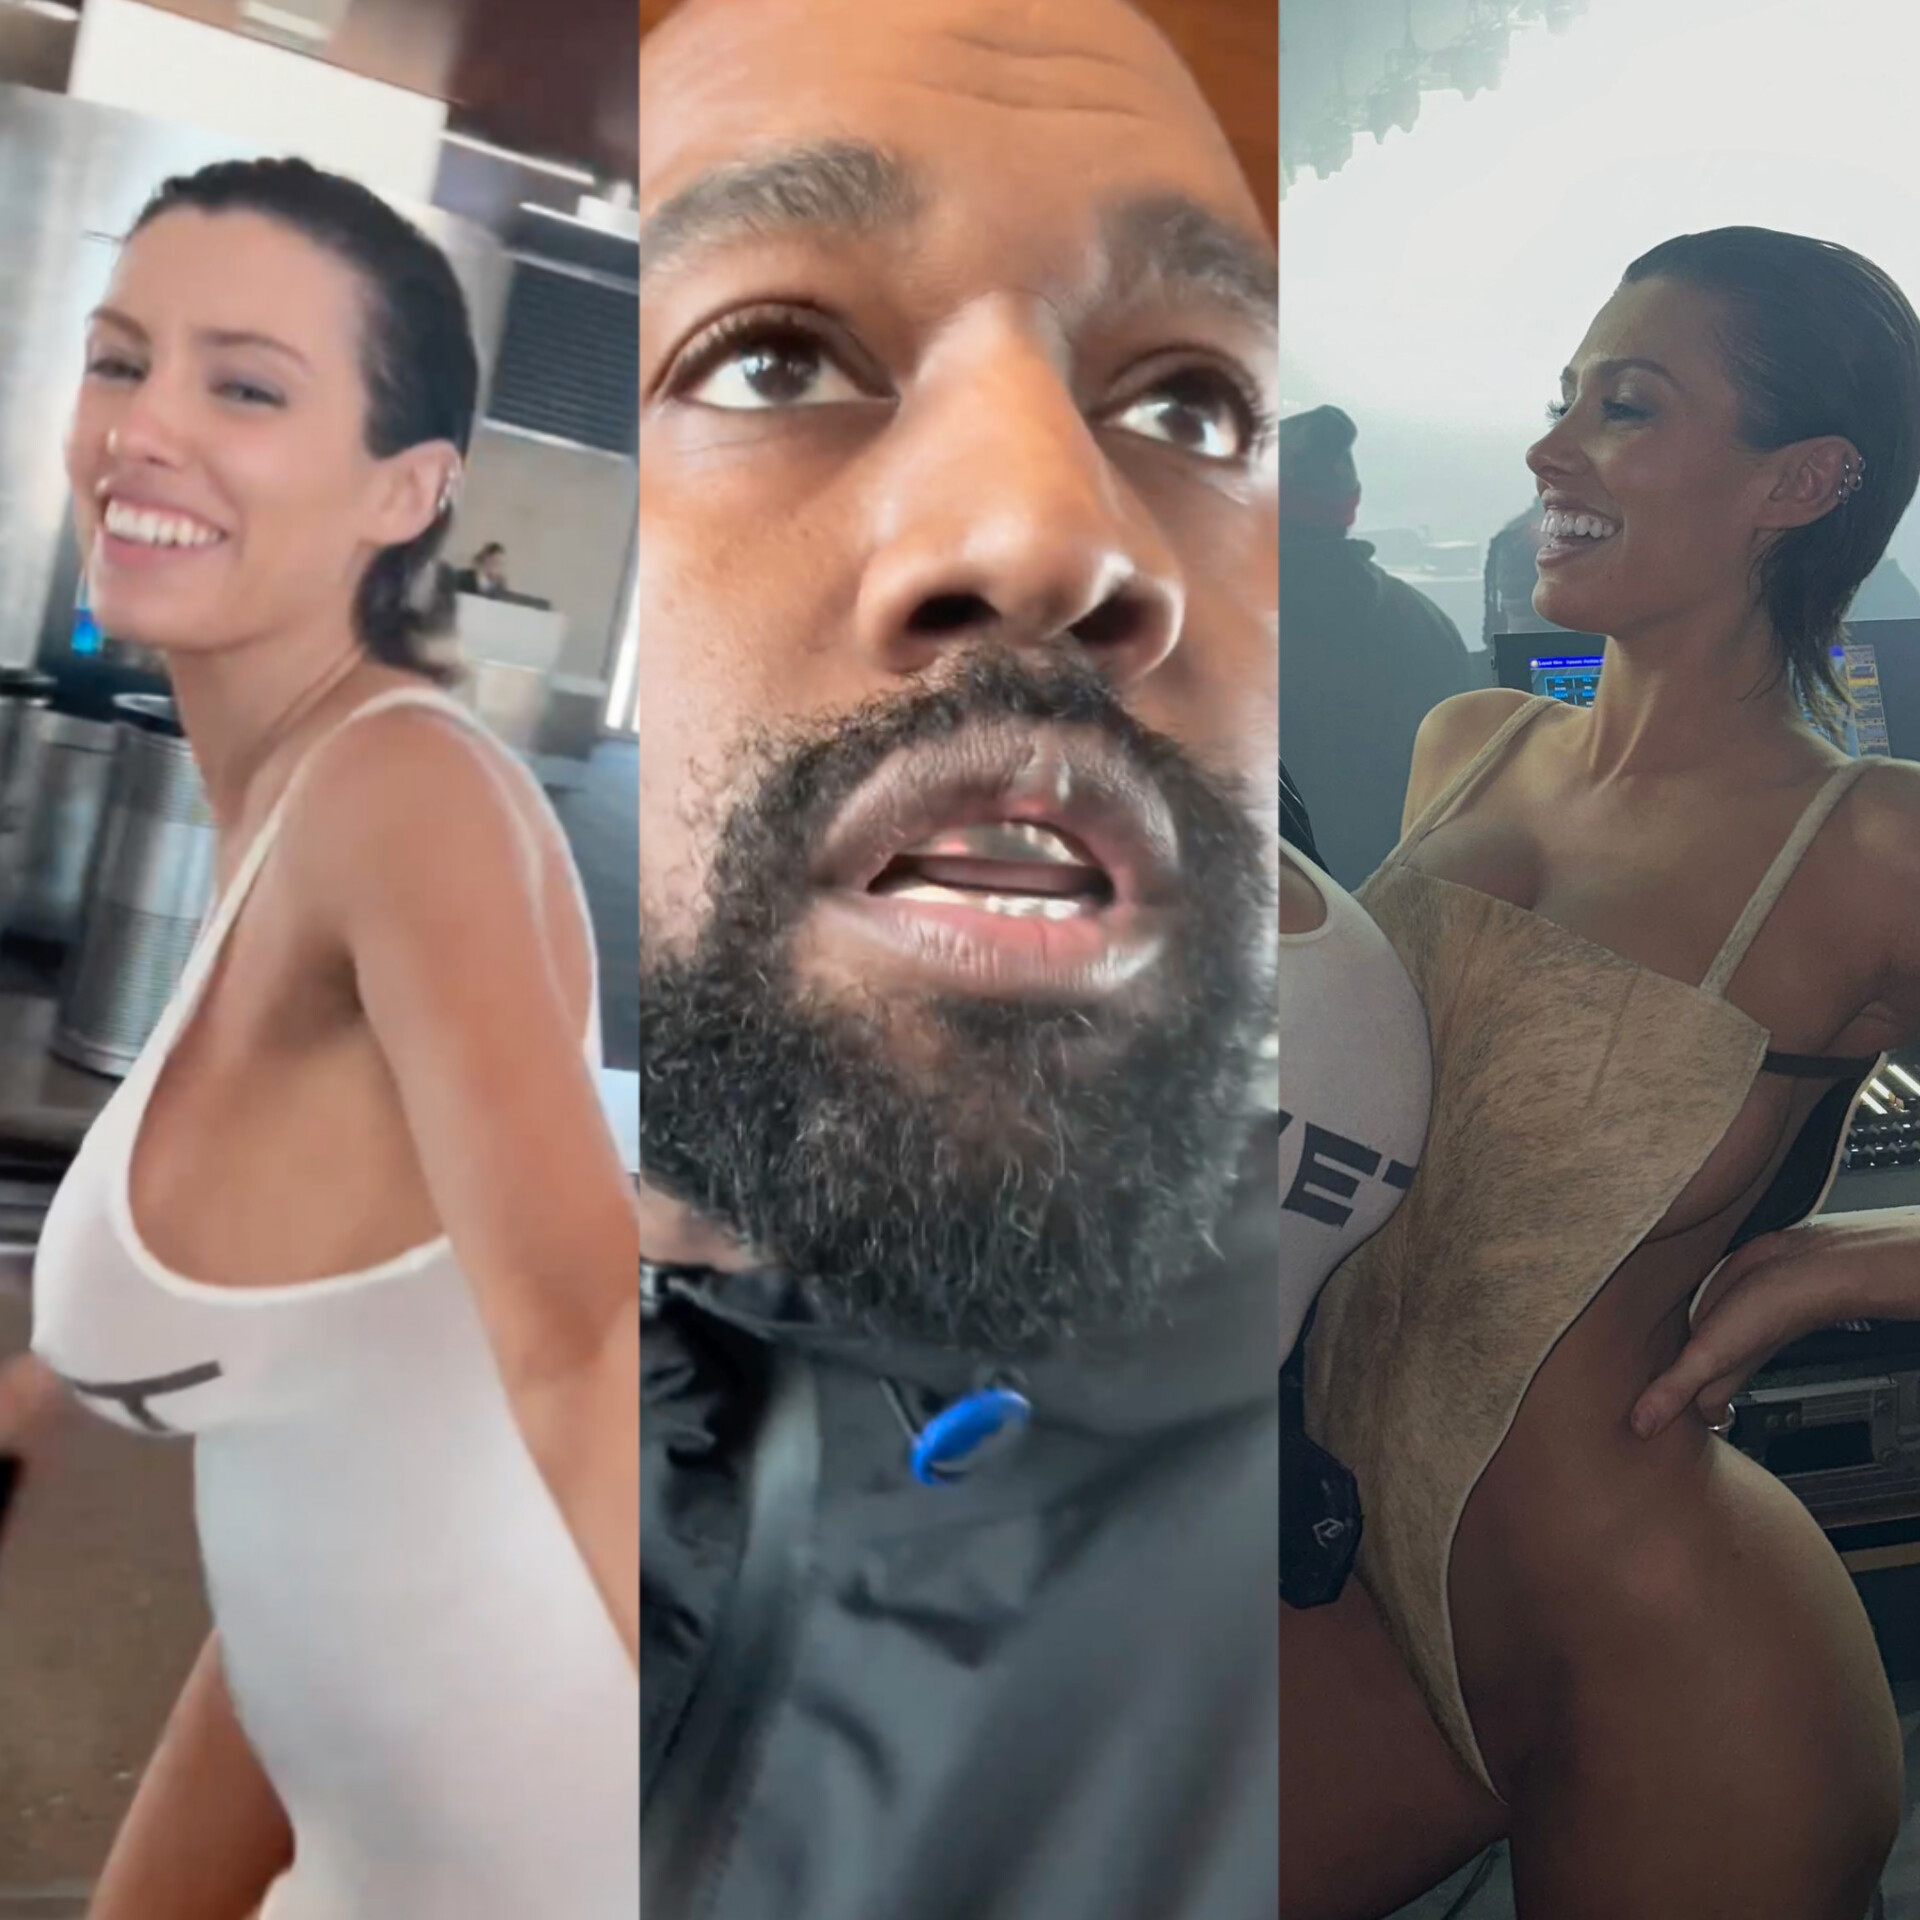 Go f?k yourself,she makes me happy, go post your own wife - Kanye West defends posting risqu� photos of wife Bianca Censori on Instagram (video)